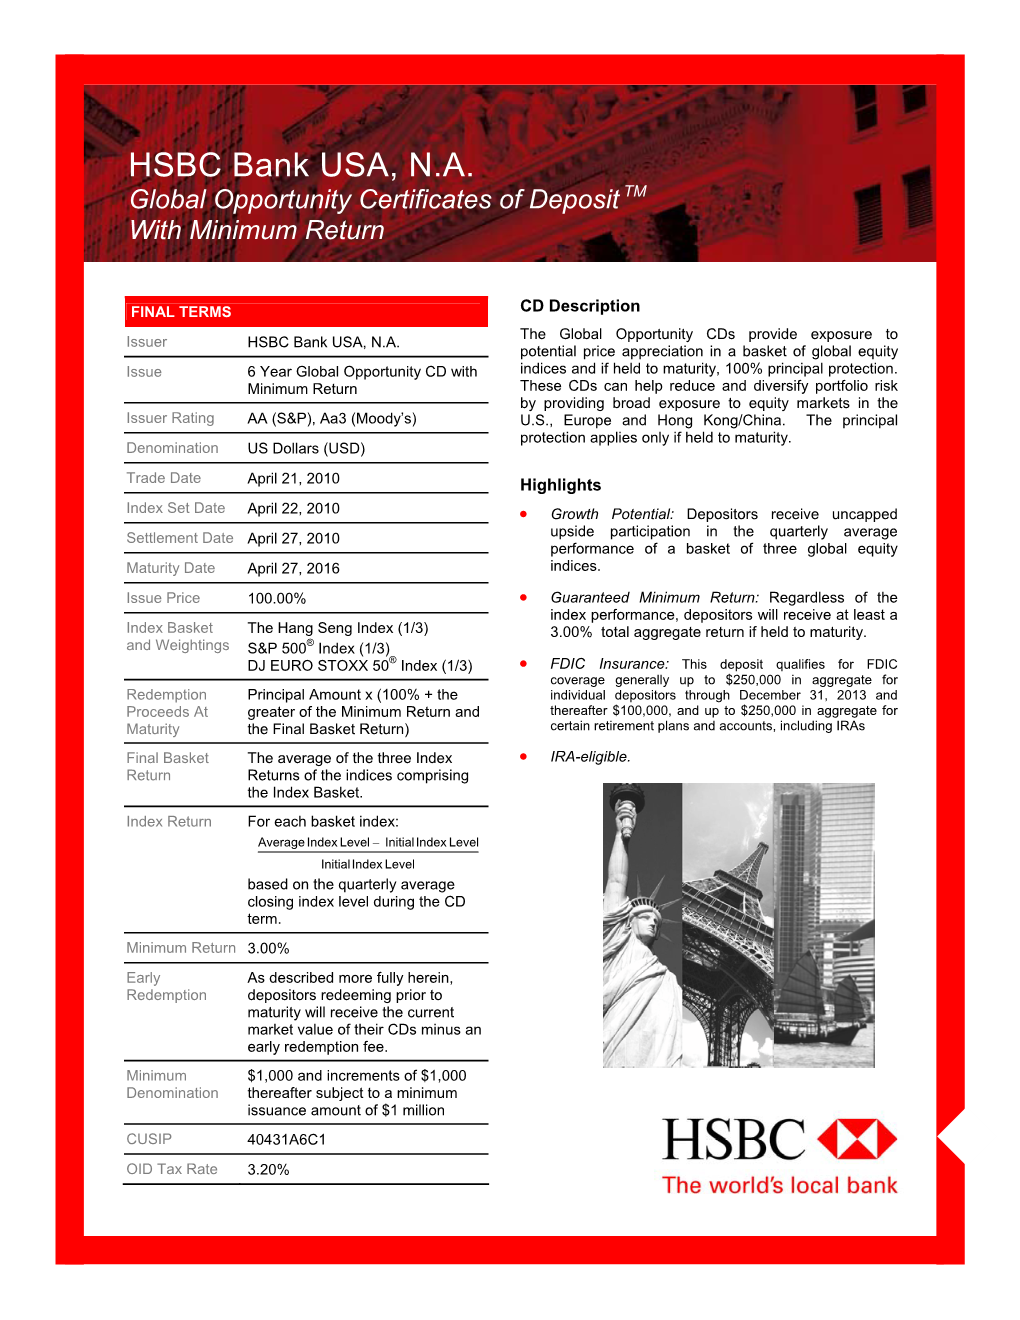 HSBC Bank USA, N.A. Global Opportunity Certificates of Deposit TM with Minimum Return